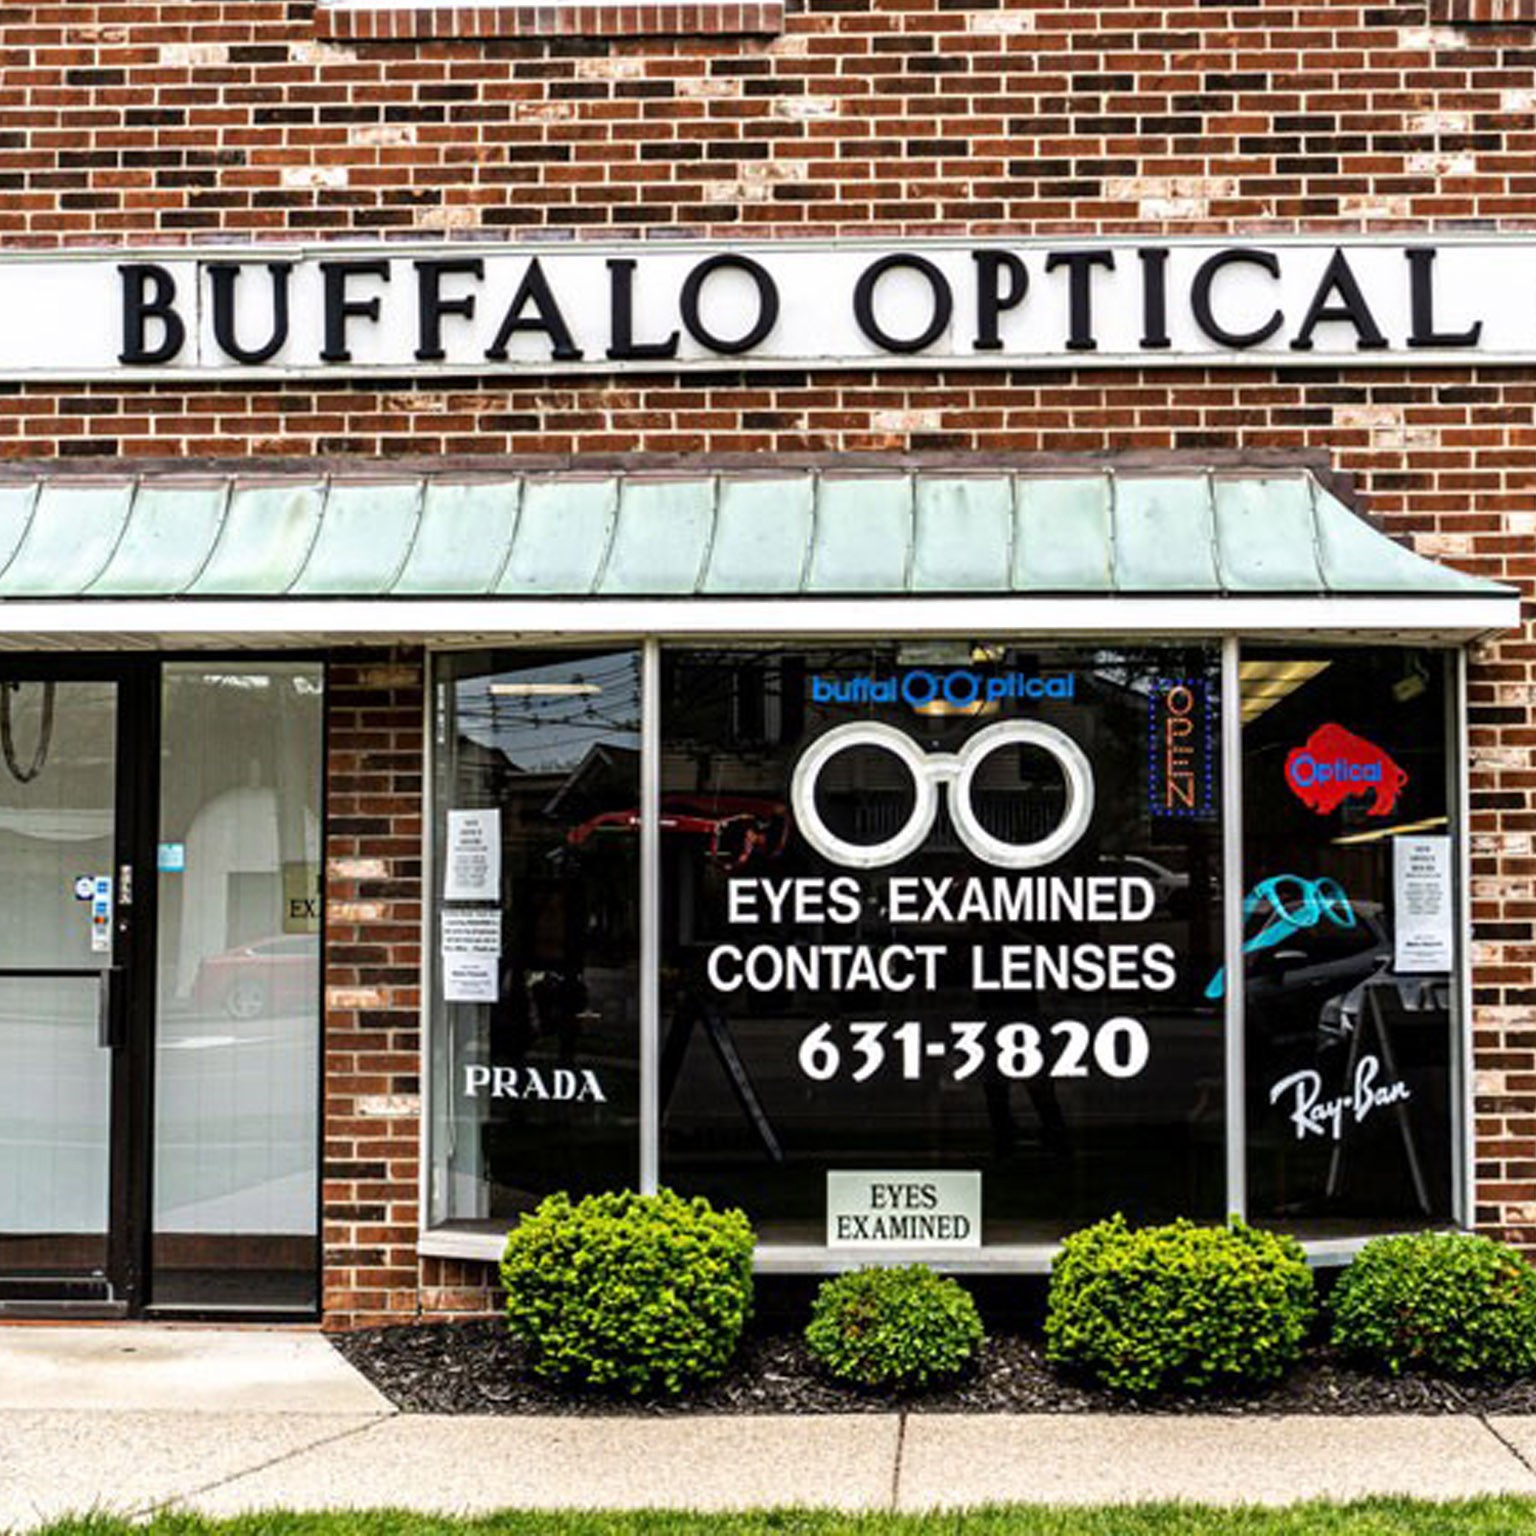 office street view buffalo optical your local eye doctor williamsville